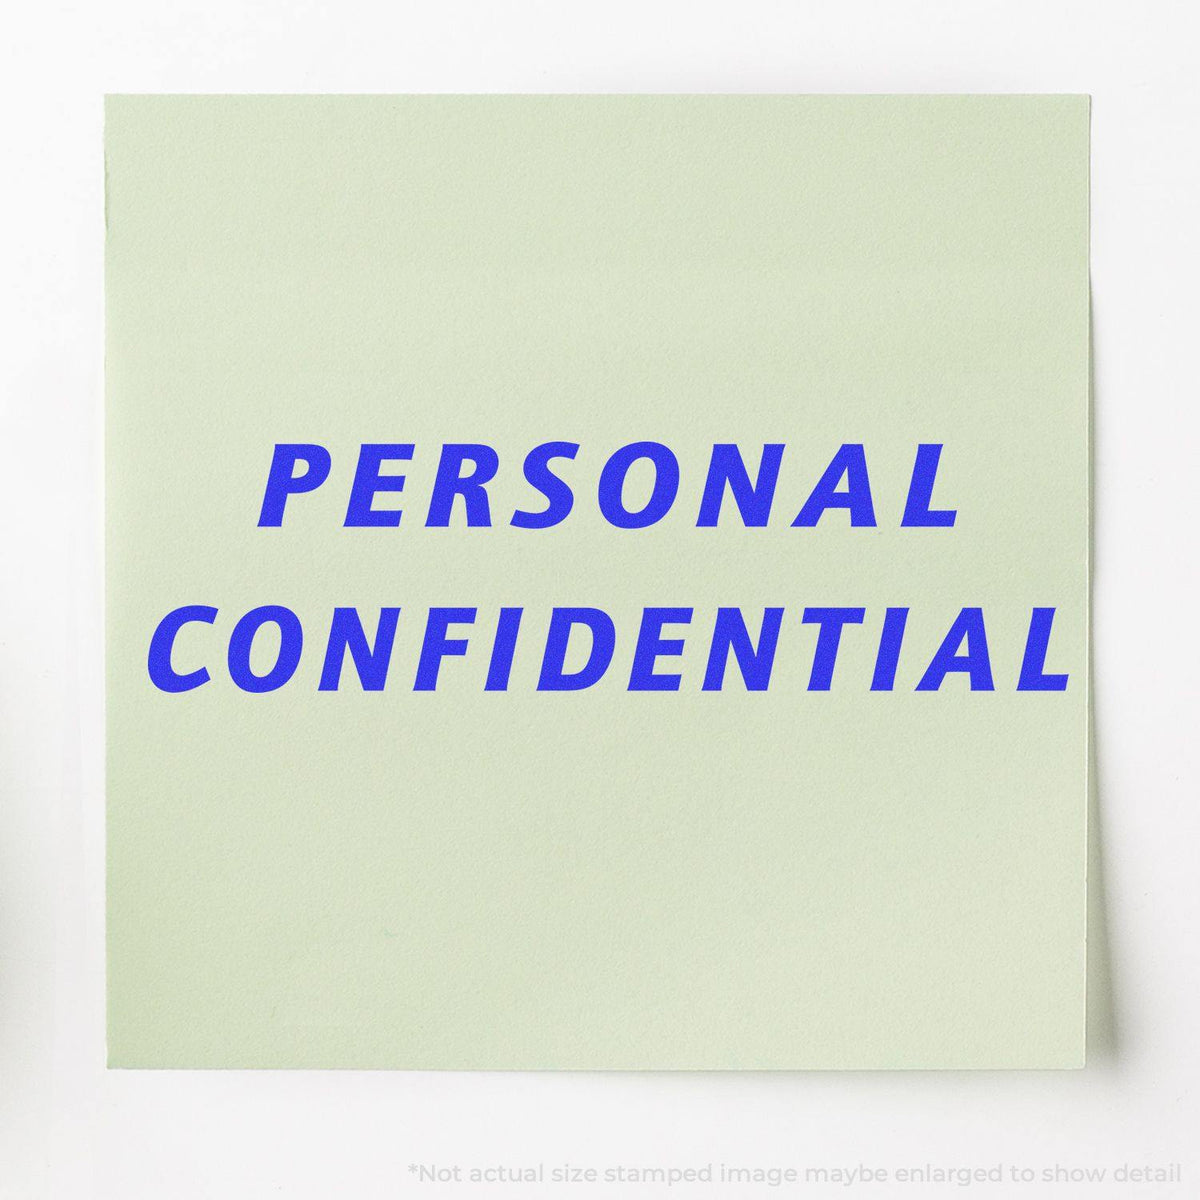 In Use Italic Personal Confidential Rubber Stamp Image